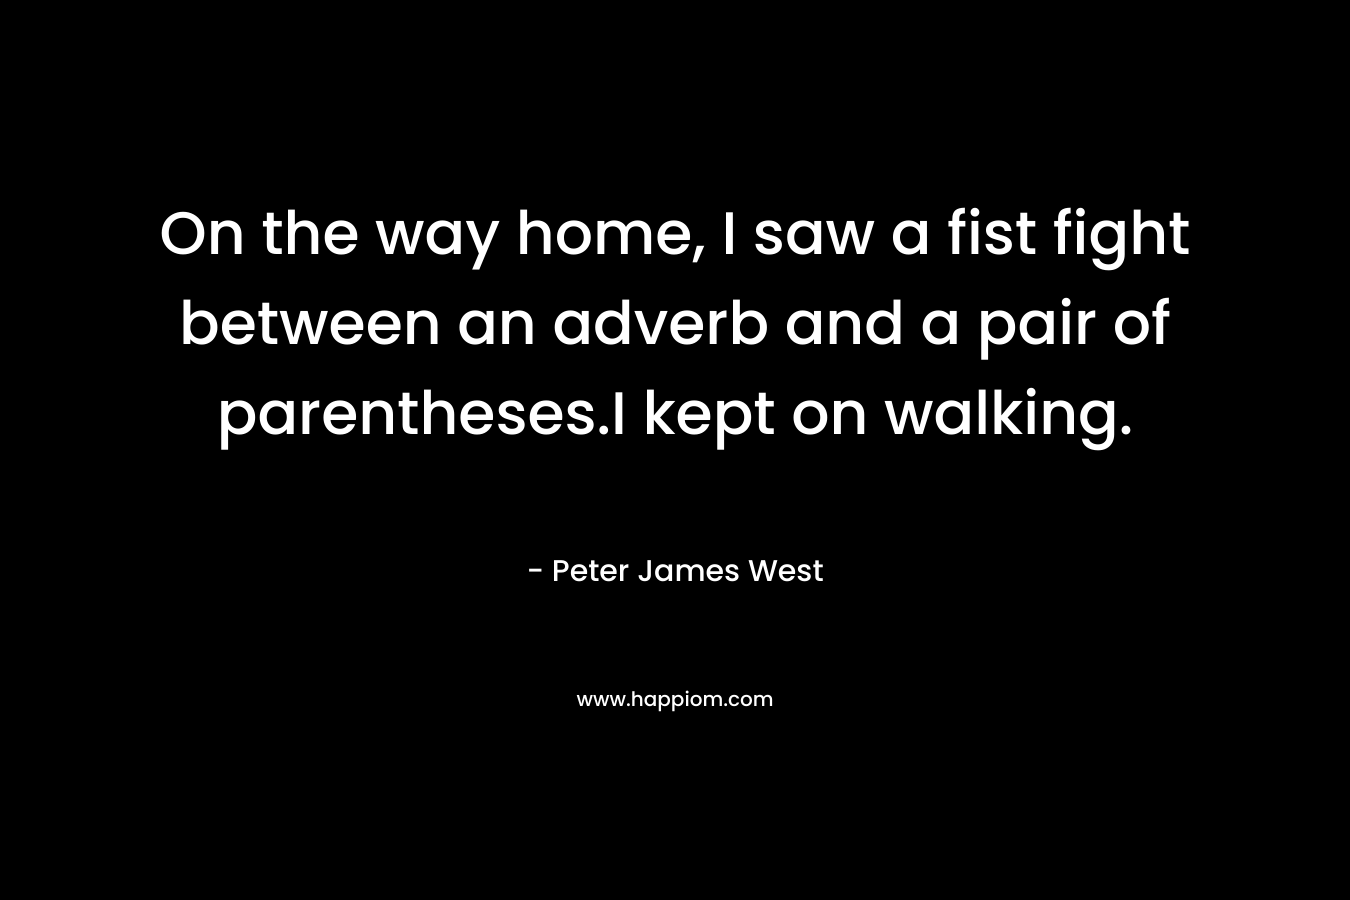 On the way home, I saw a fist fight between an adverb and a pair of parentheses.I kept on walking. – Peter James West